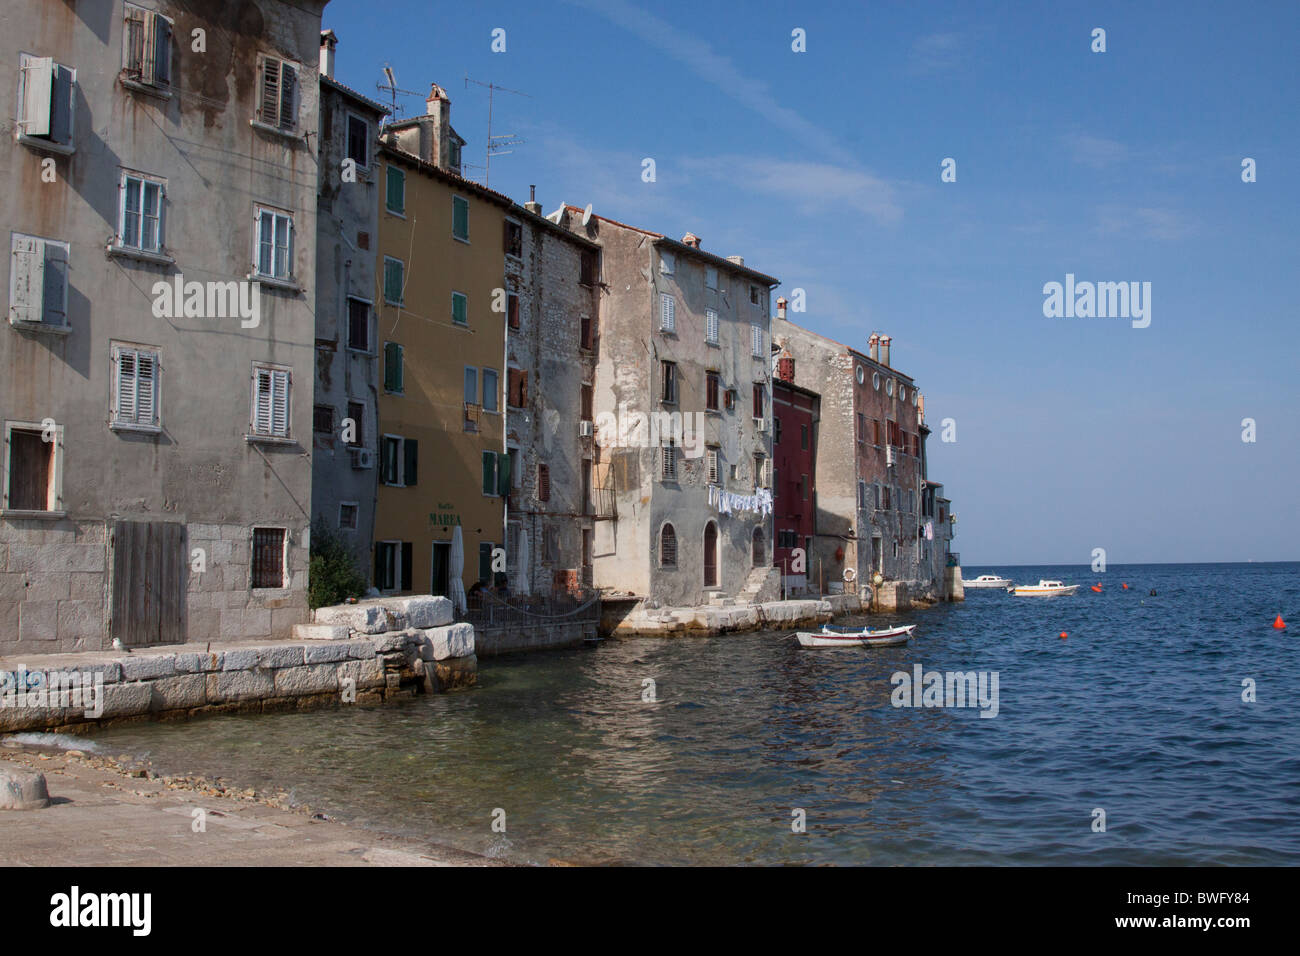 Rovinj old buildings by the sea Stock Photo